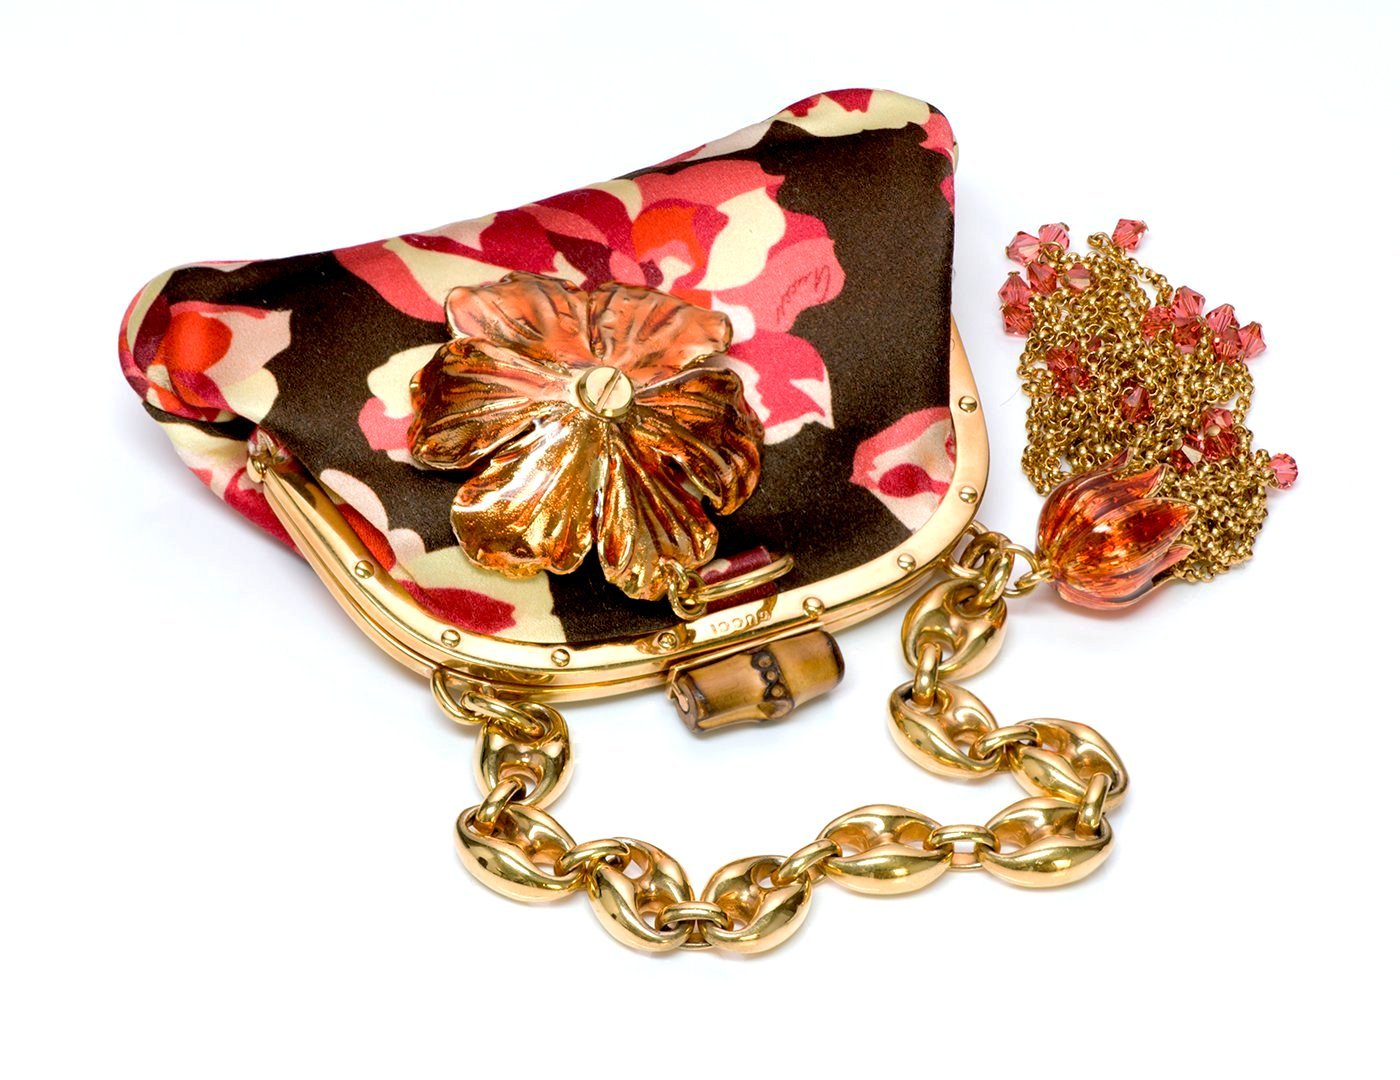 Gucci by Tom Ford Bamboo Satin Flower Bag